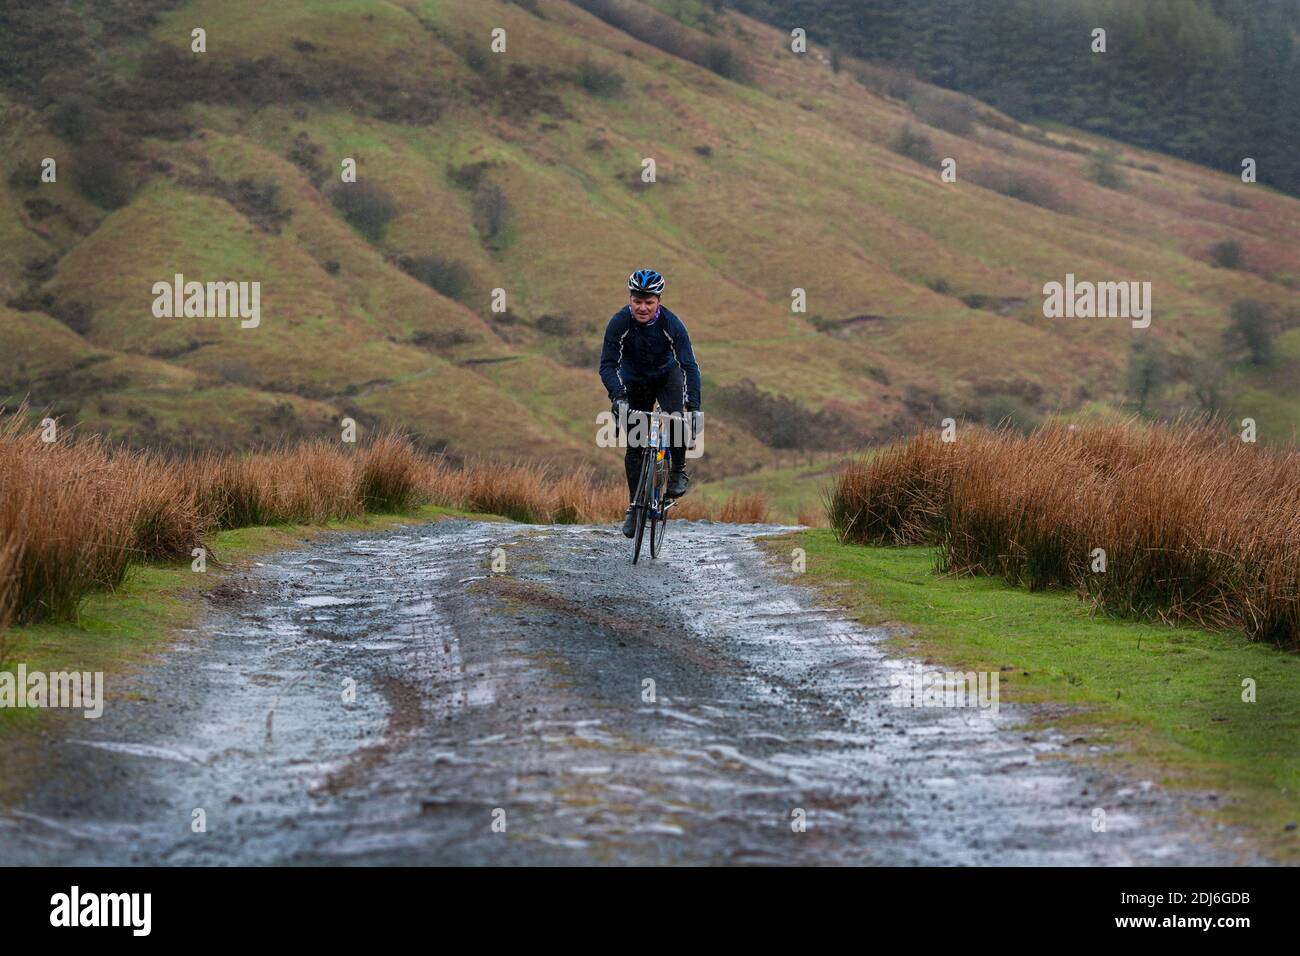 Black Mountains Cycle Tour with Robert Penn (author of It's All About the Bike) in Brecon Beacons National Park in Monmouthshire, south east Wales. Stock Photo